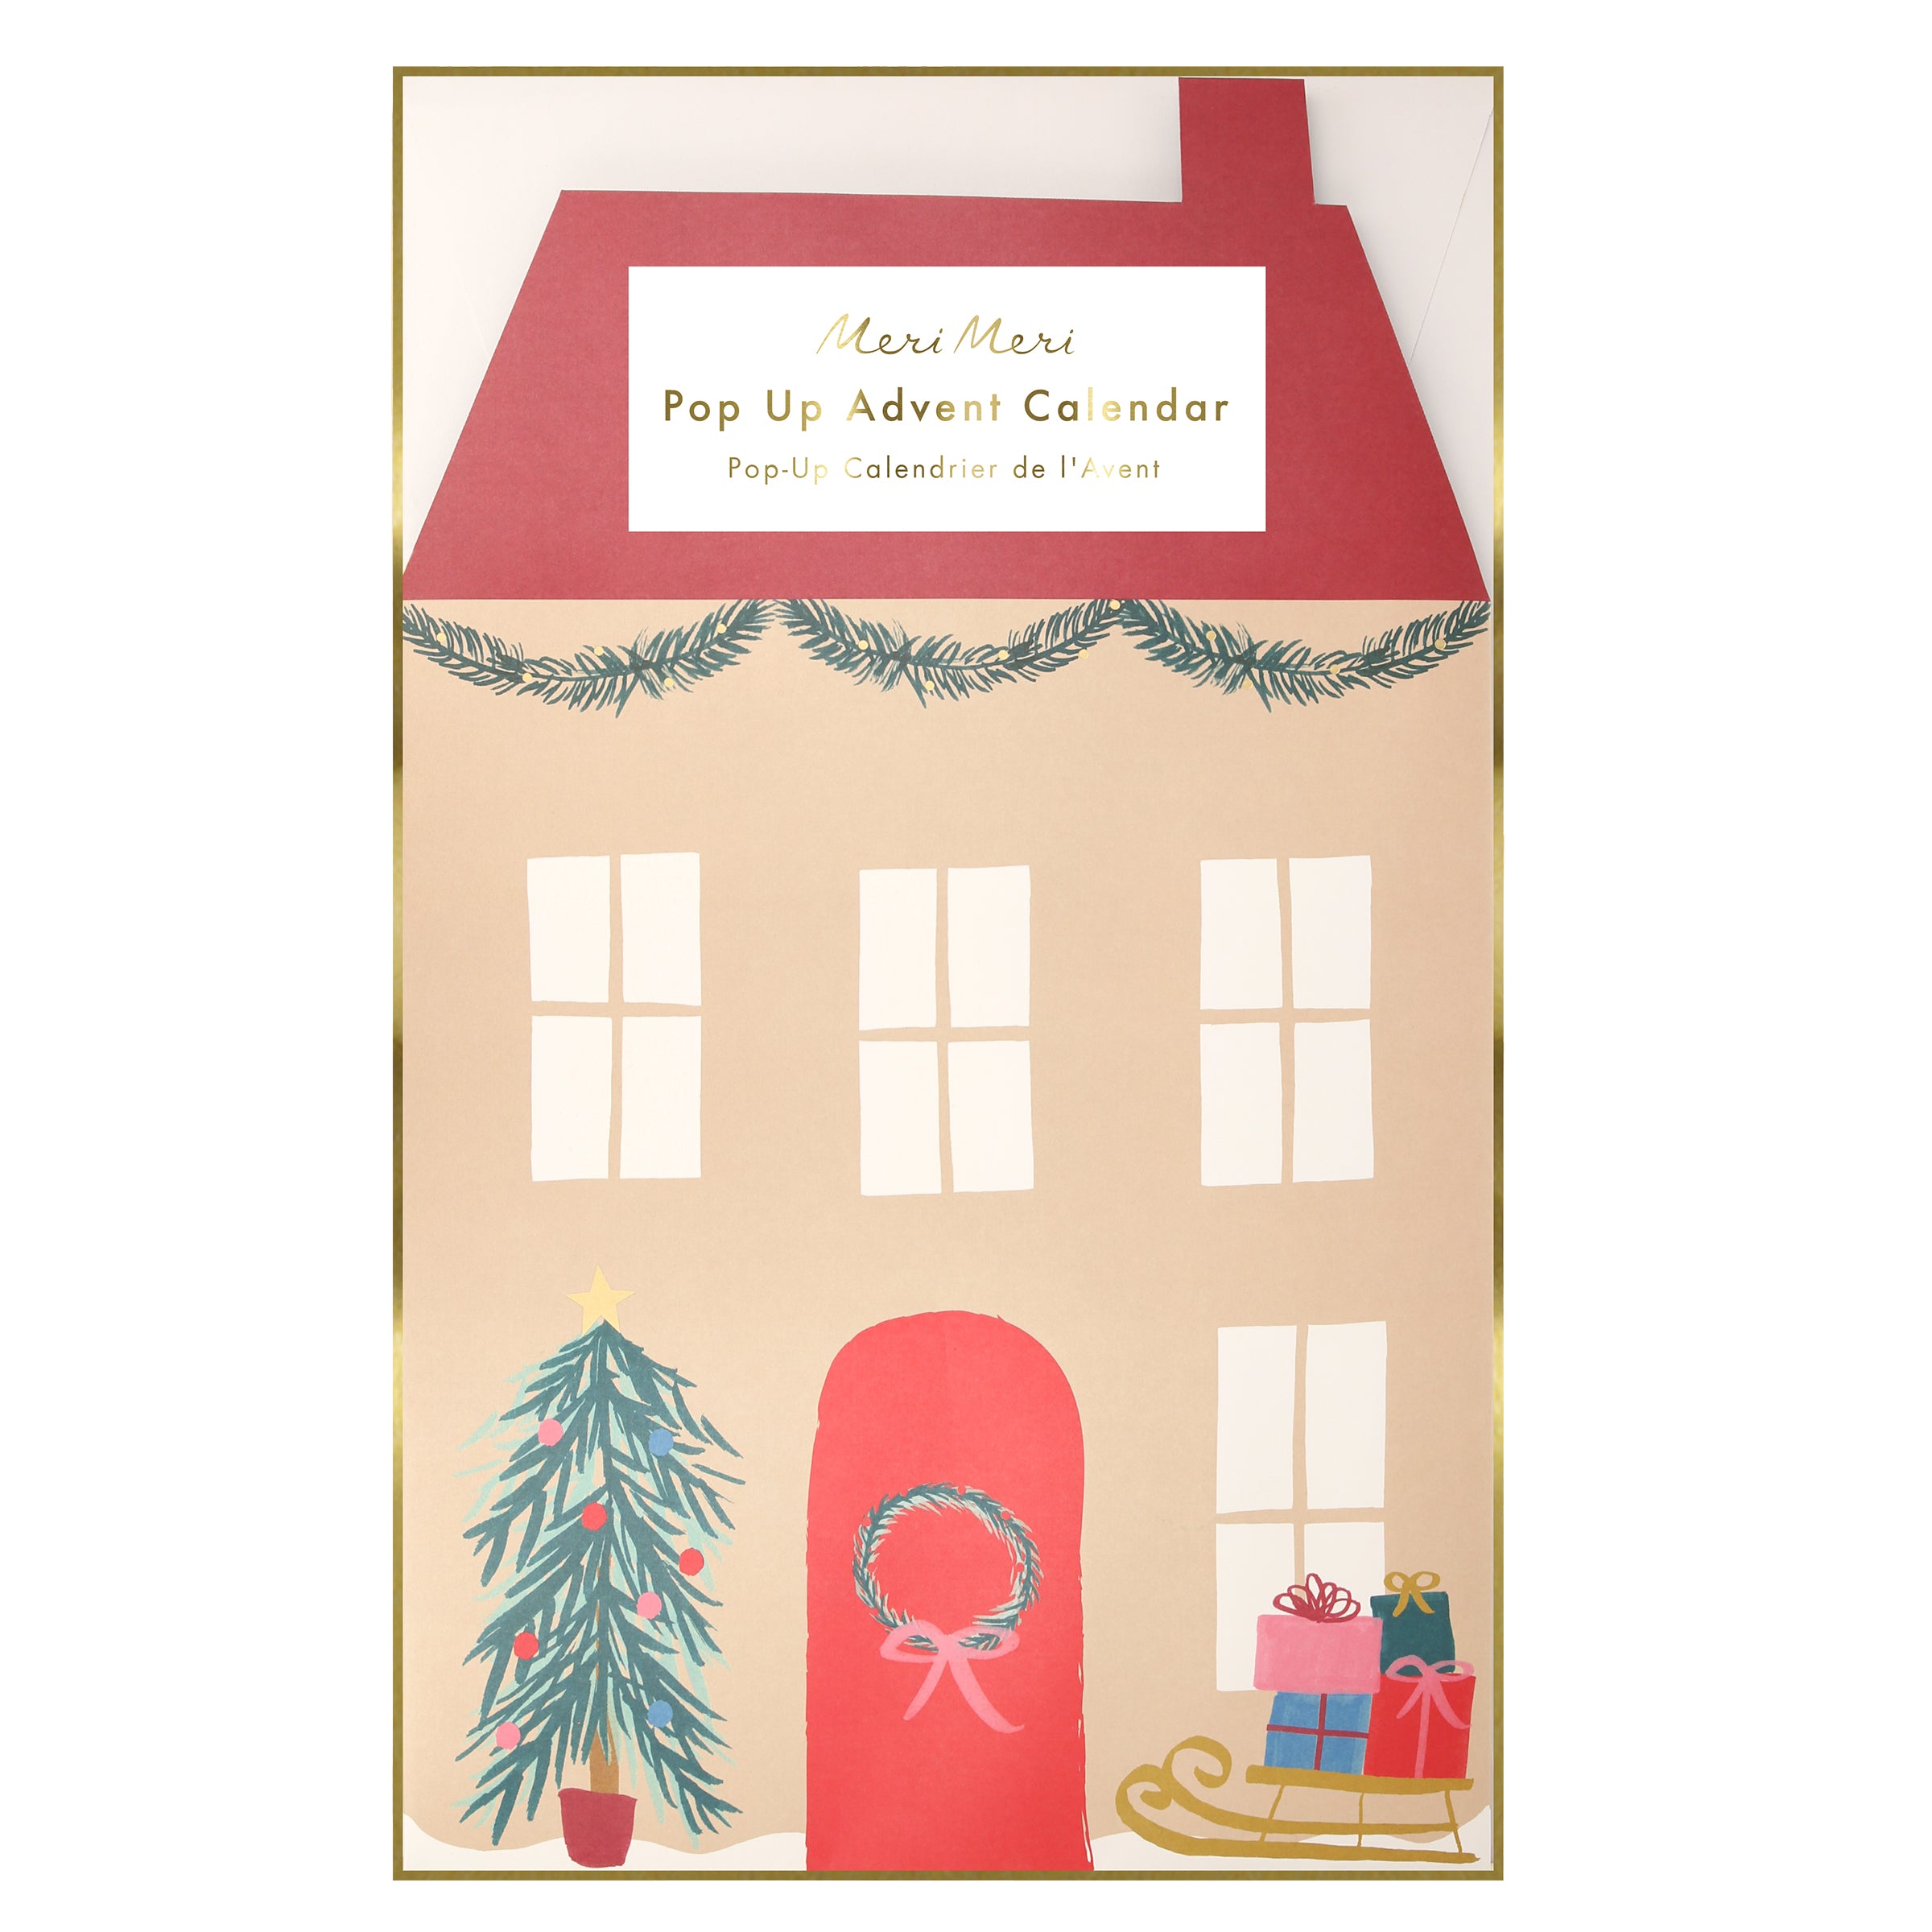 This paper doll house is designed as Santa's home, complete with his reindeer, elves, Christmas tree and gifts.